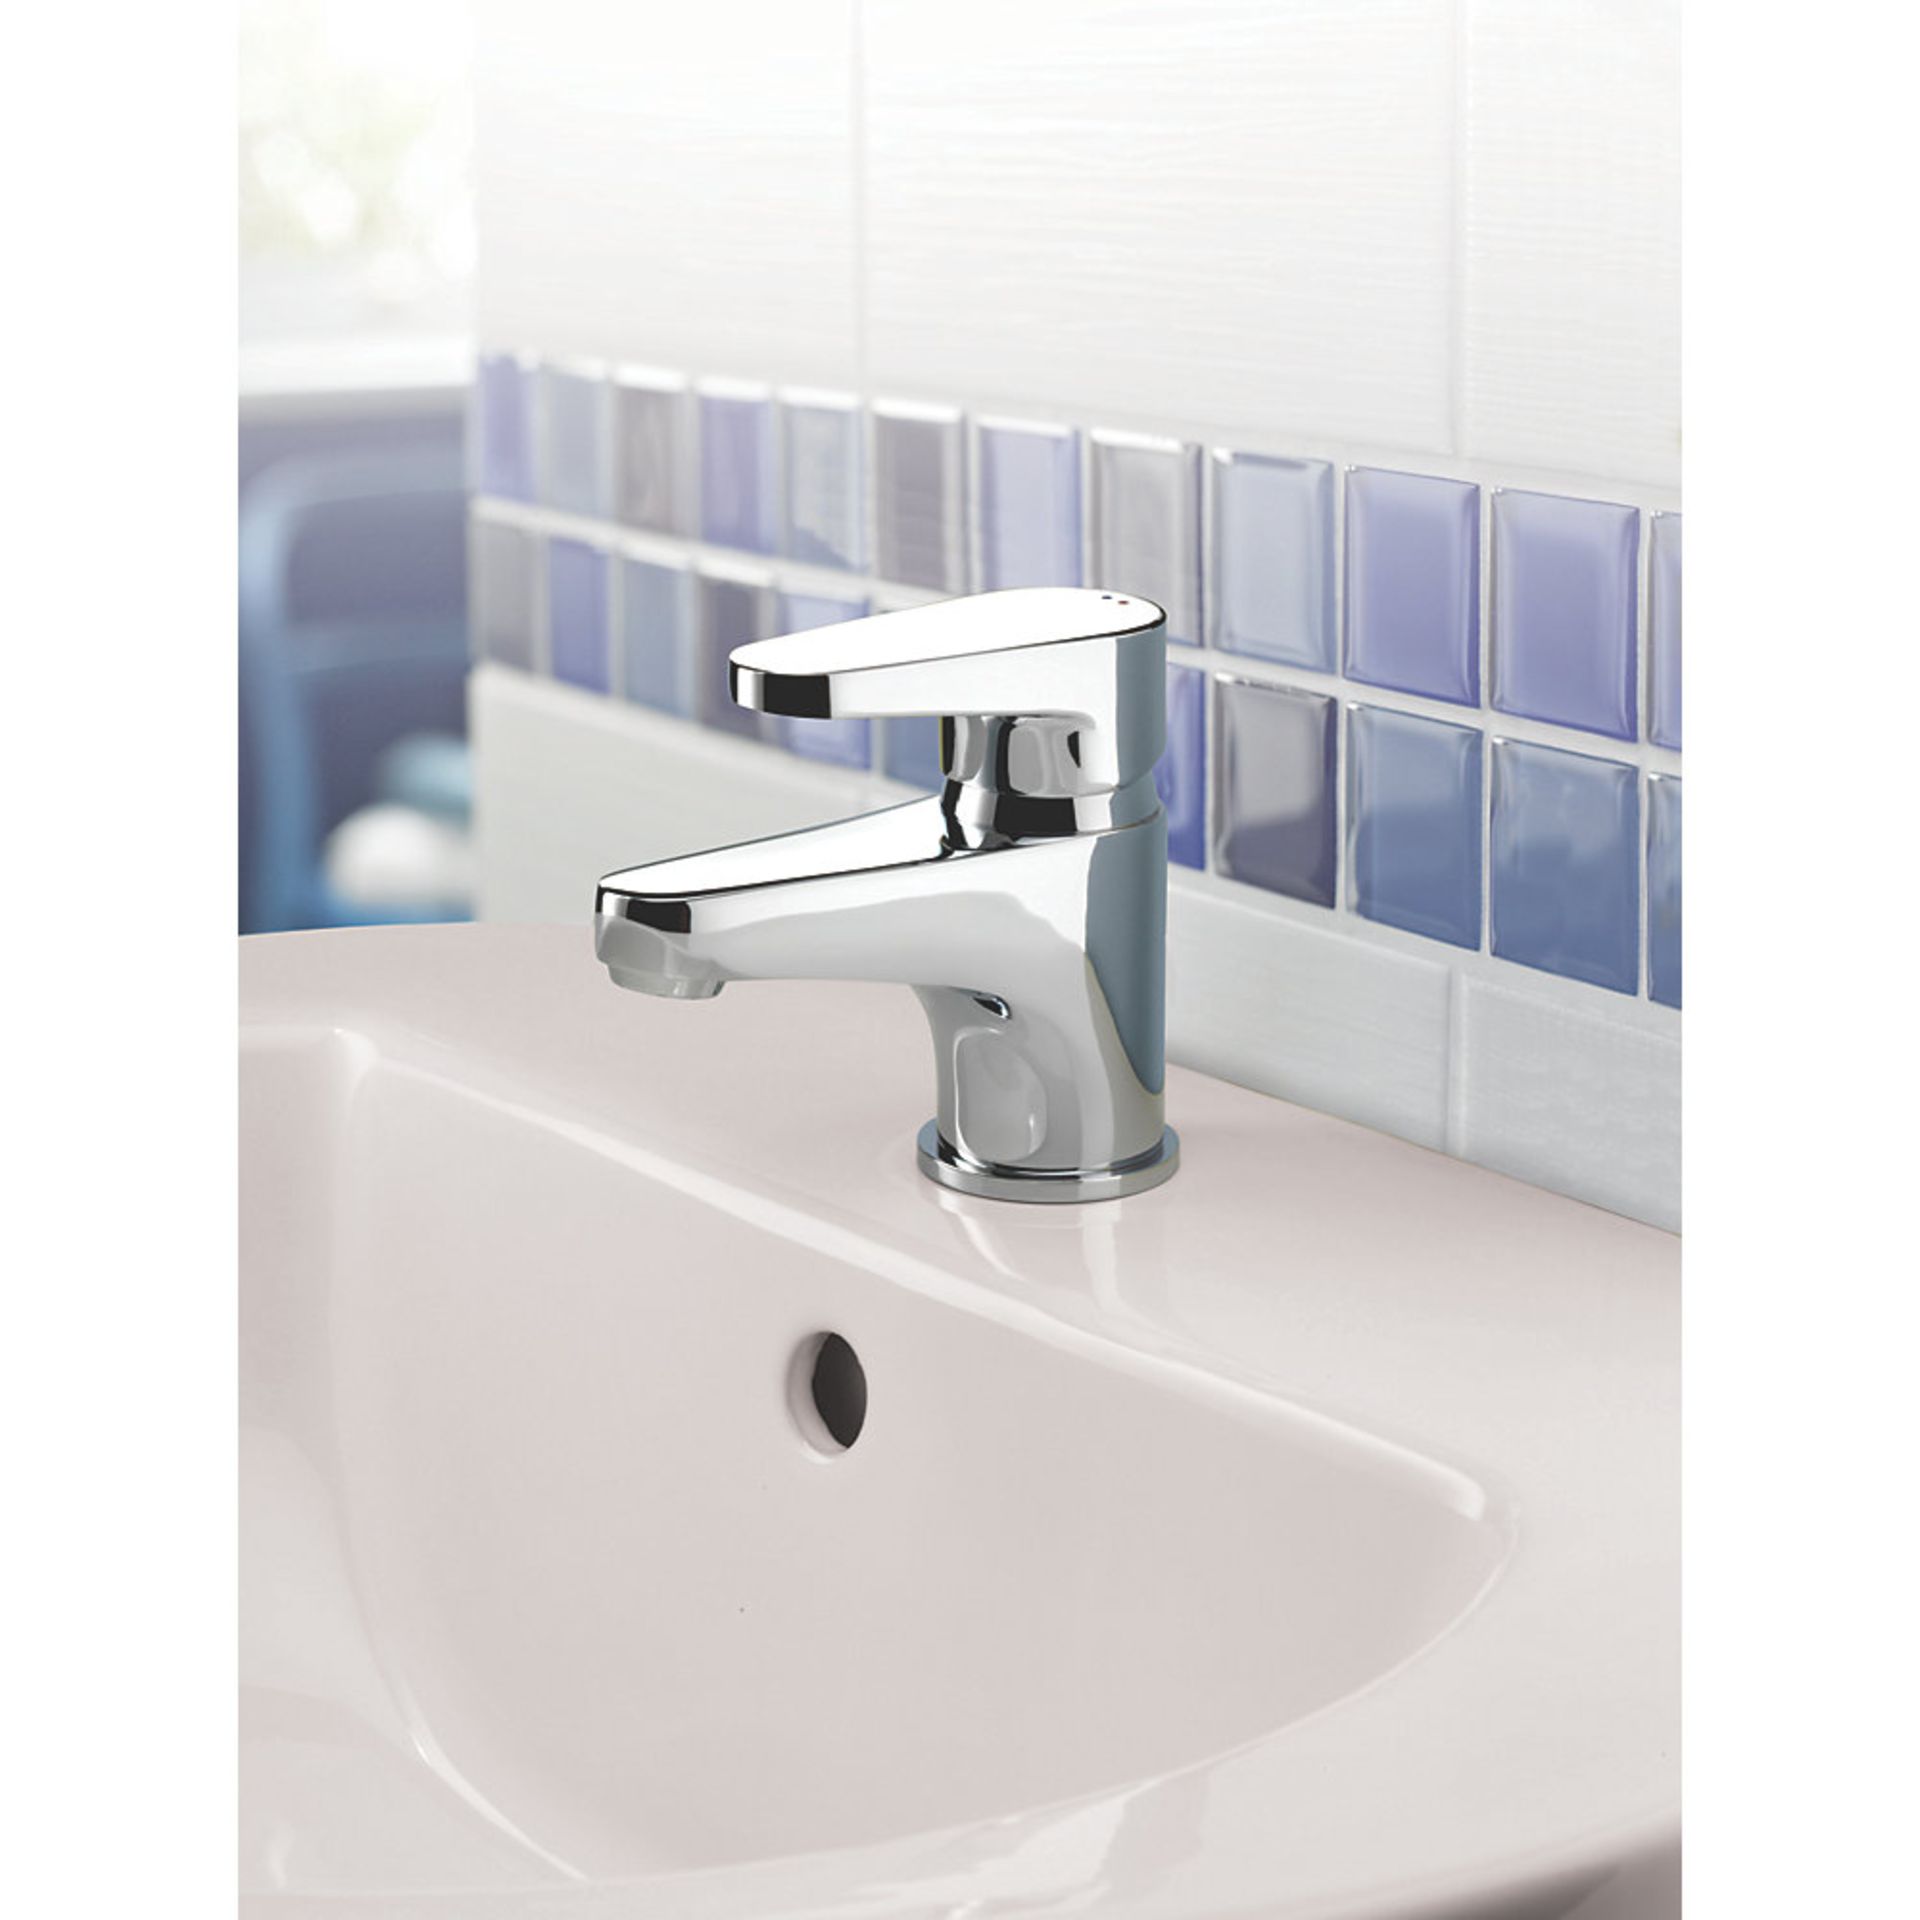 (PP192) Bristan Quest Bathroom Basin Mono Mixer Tap with Click Waste. Chrome-plated brass.